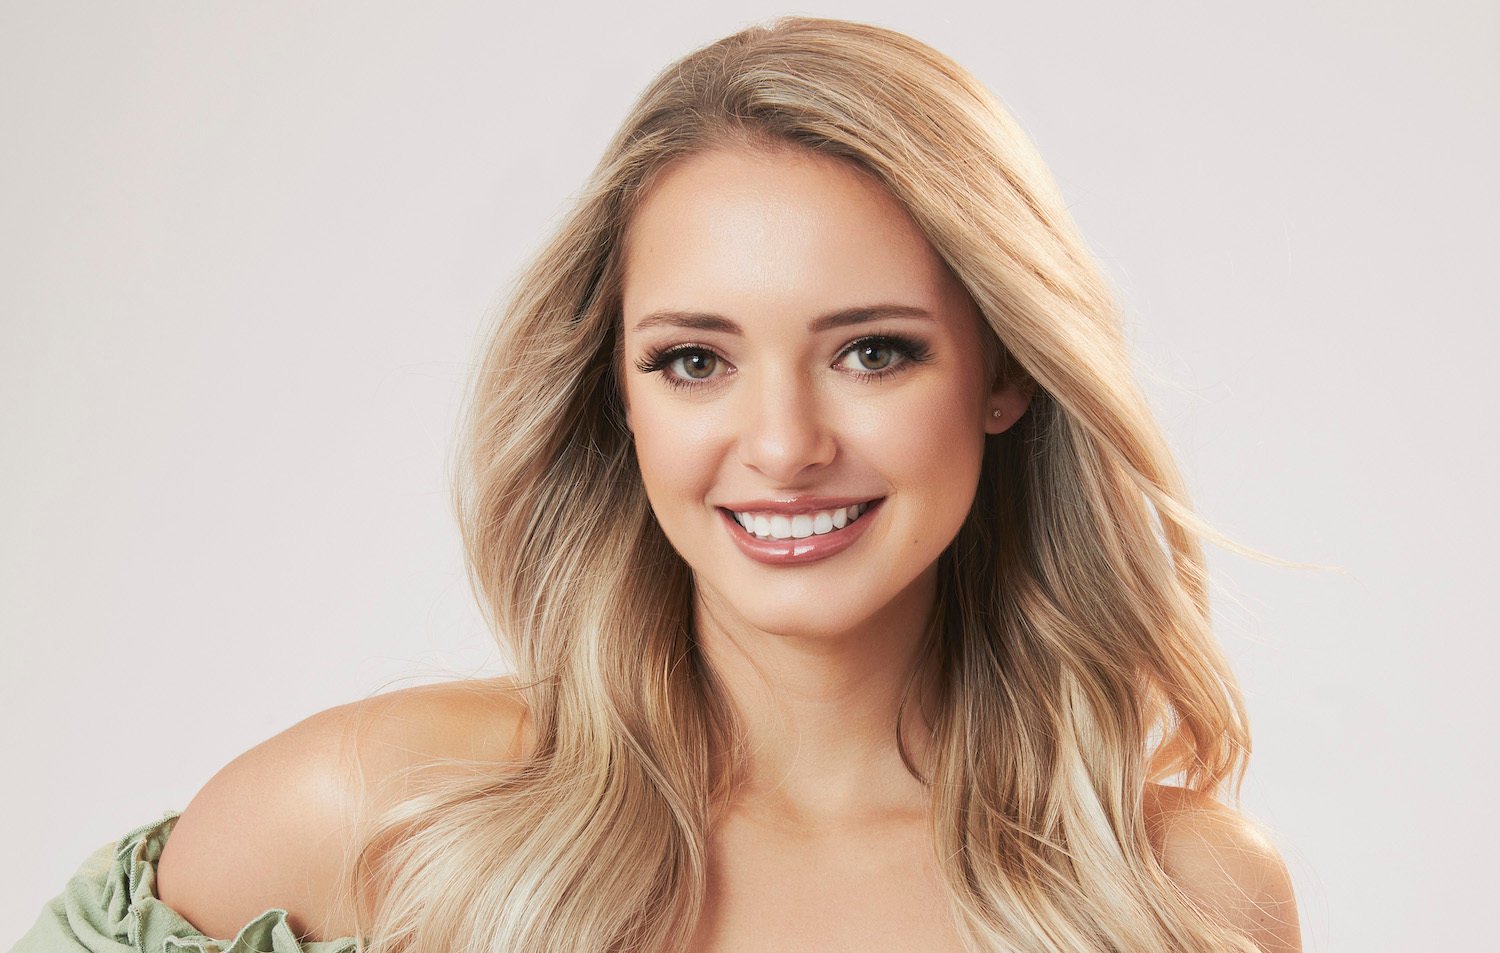 'The Bachelor' star Brooklyn Willie in her official headshot for the series.